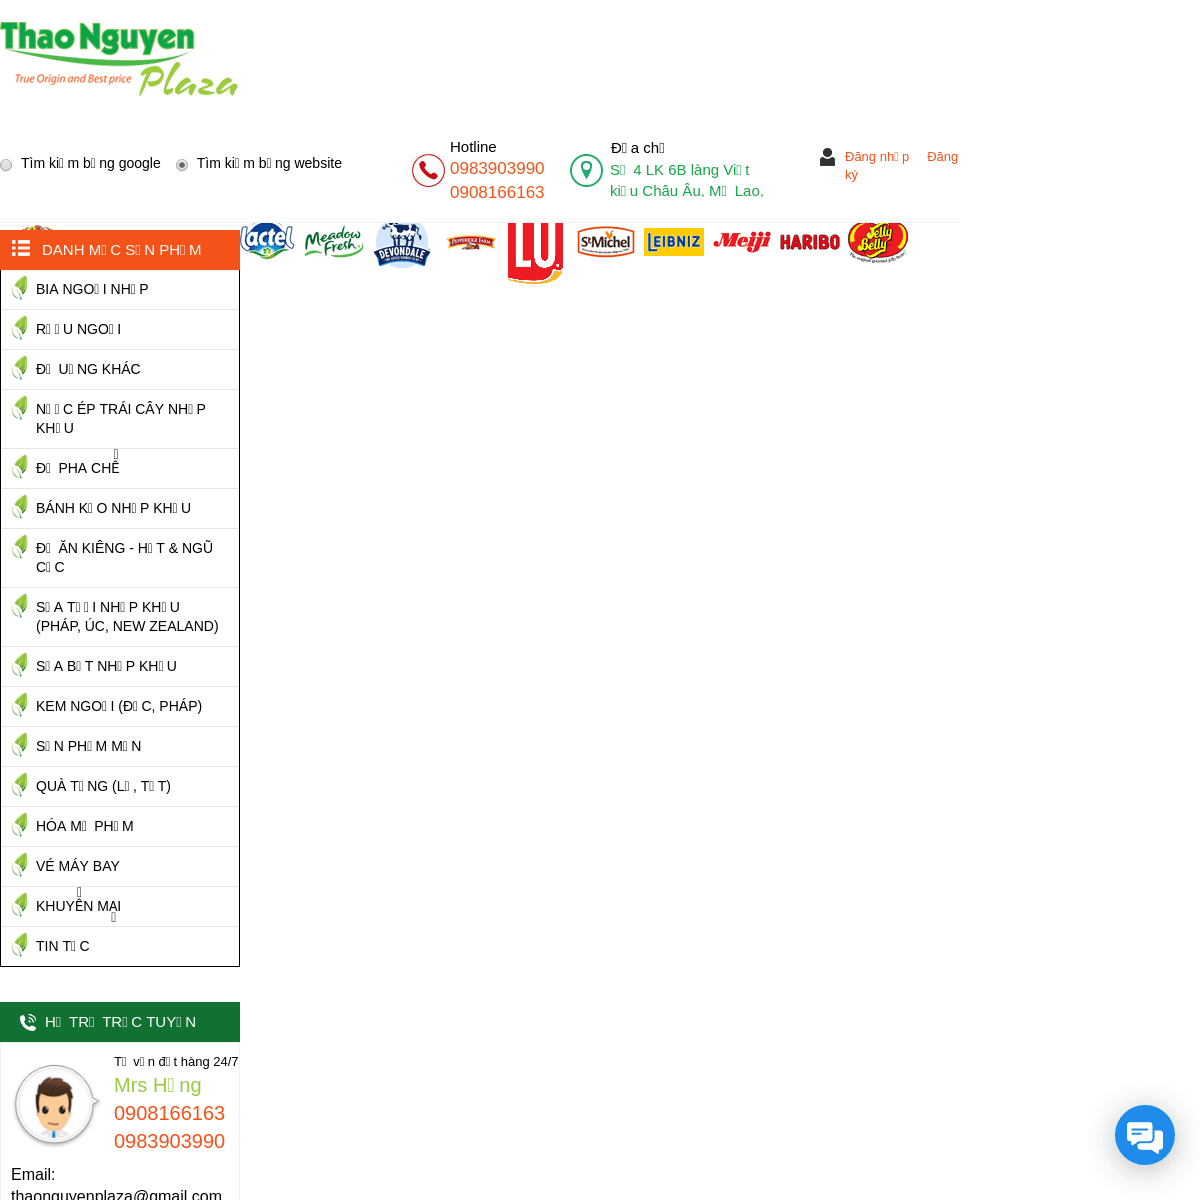 A complete backup of thaonguyenplaza.com